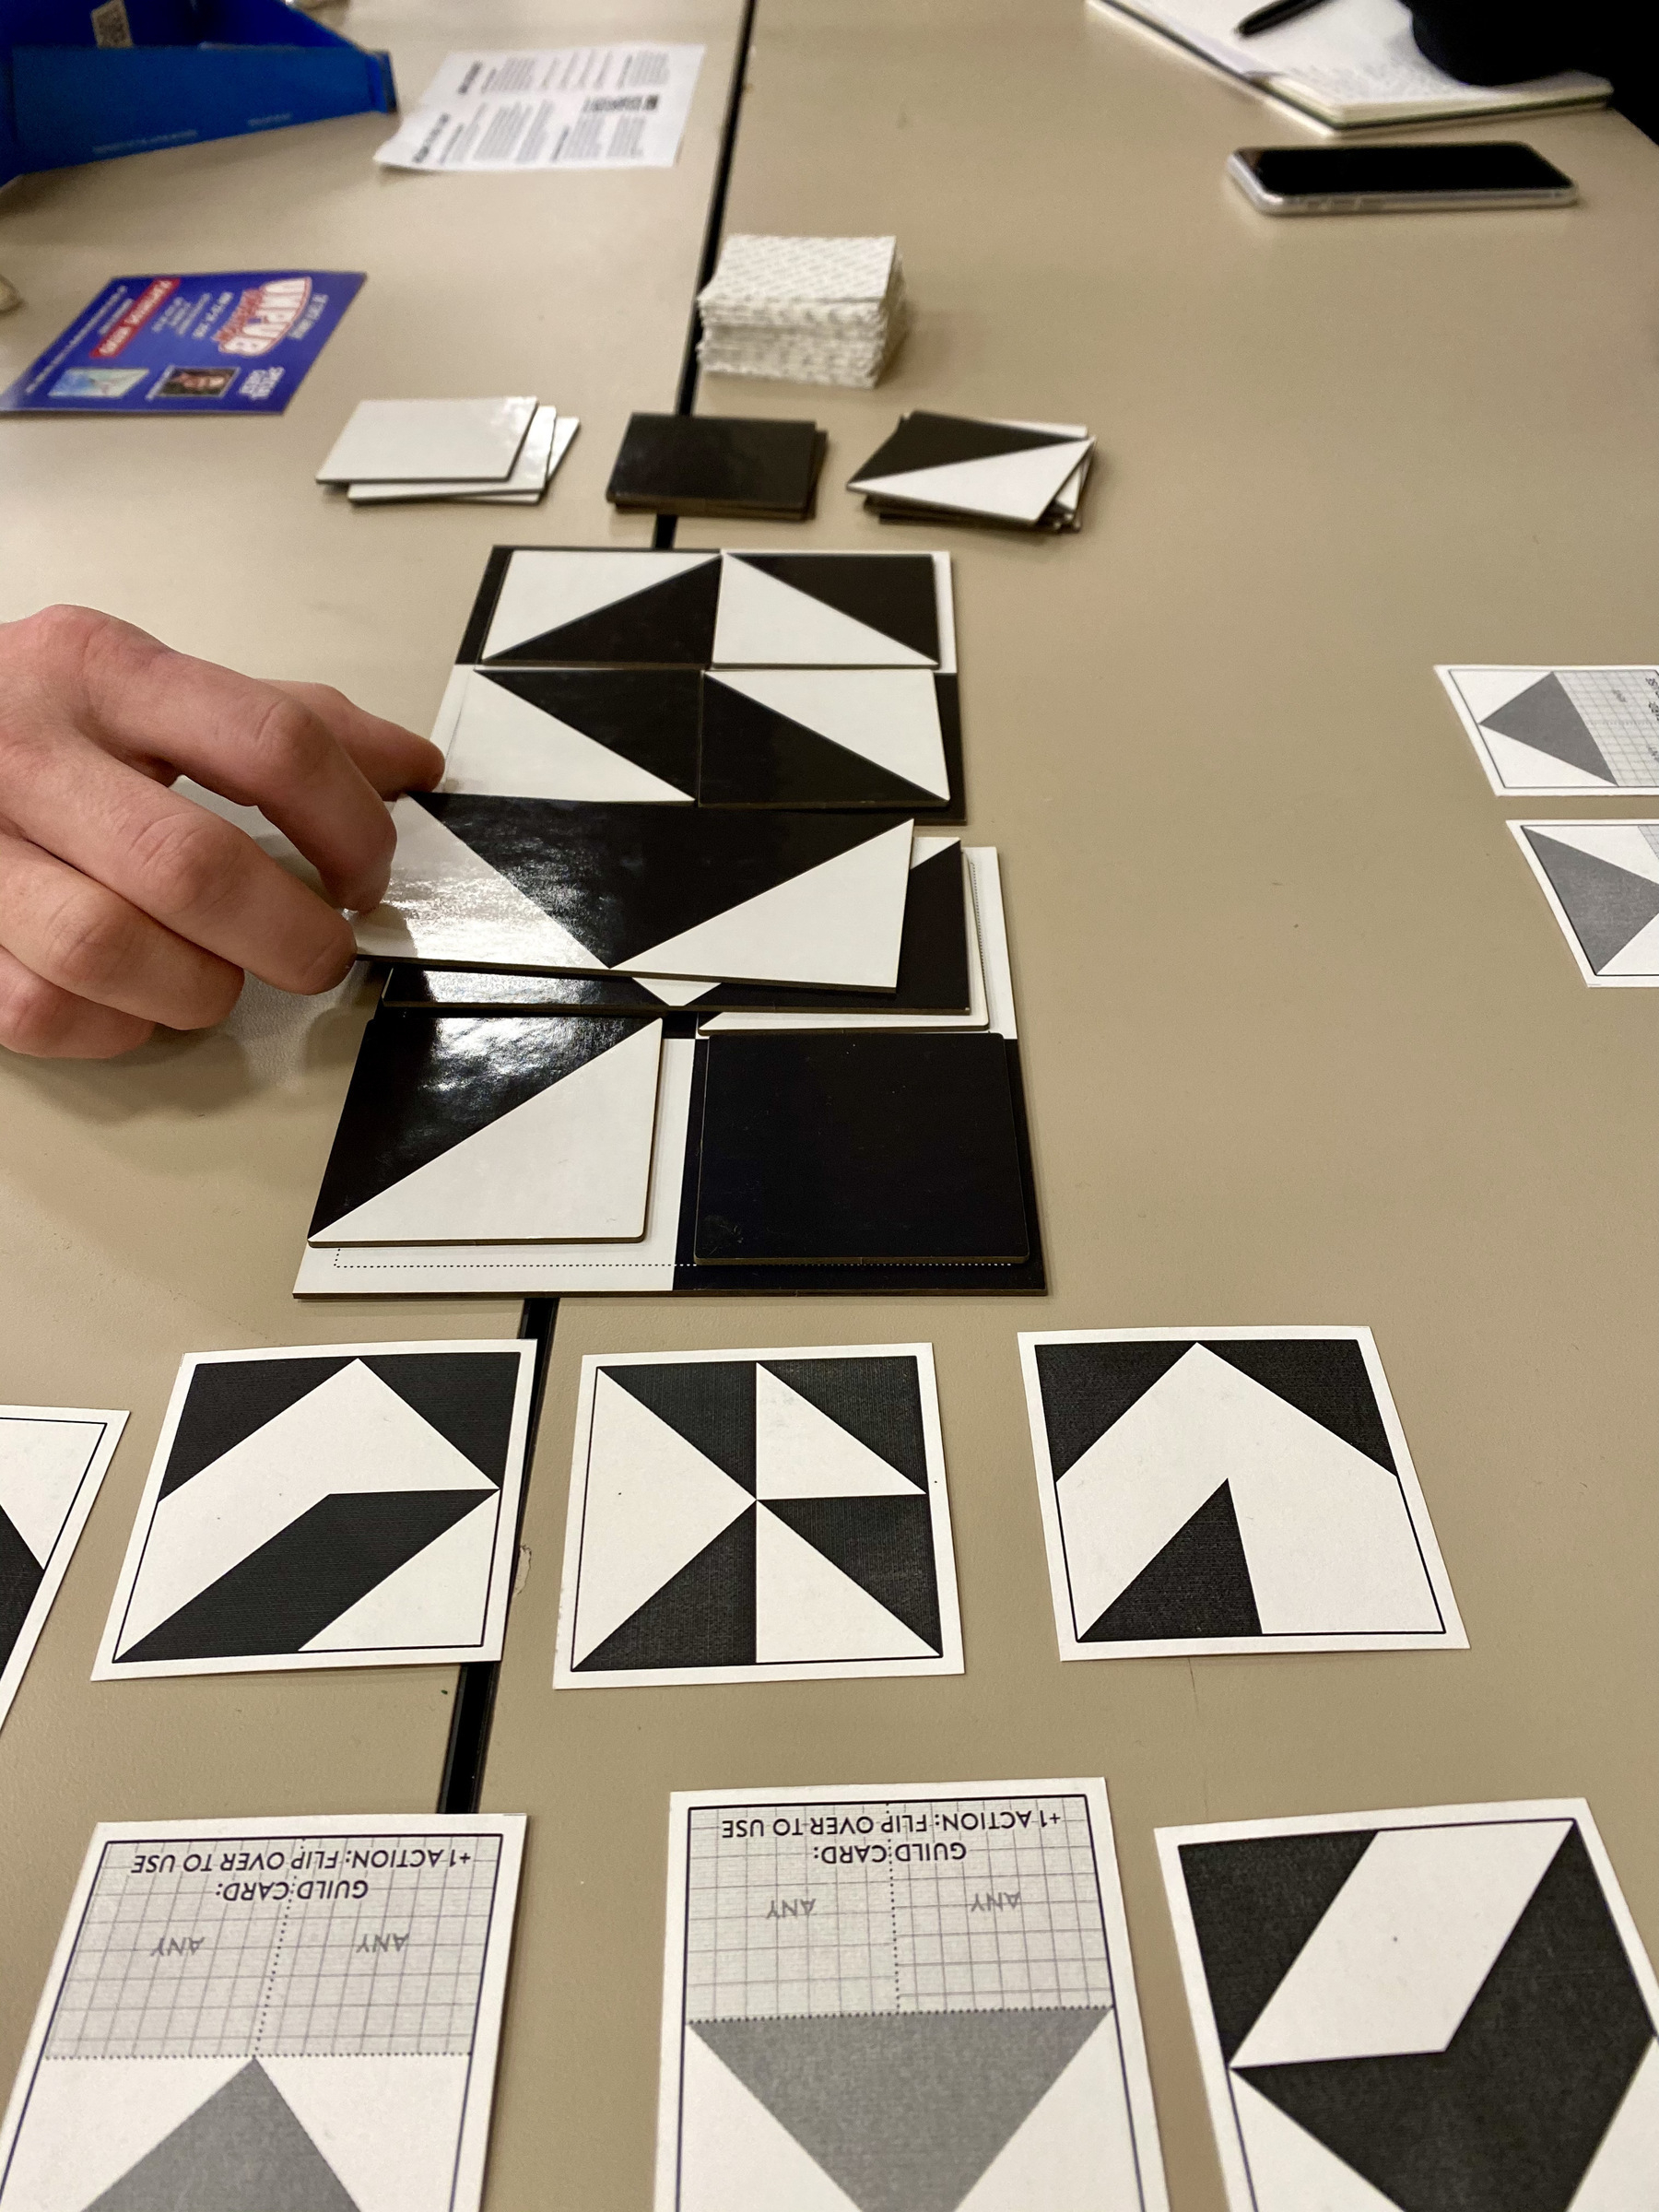 Board game with black and white tiles being played on a table with a person's hand rotating one of the tiles